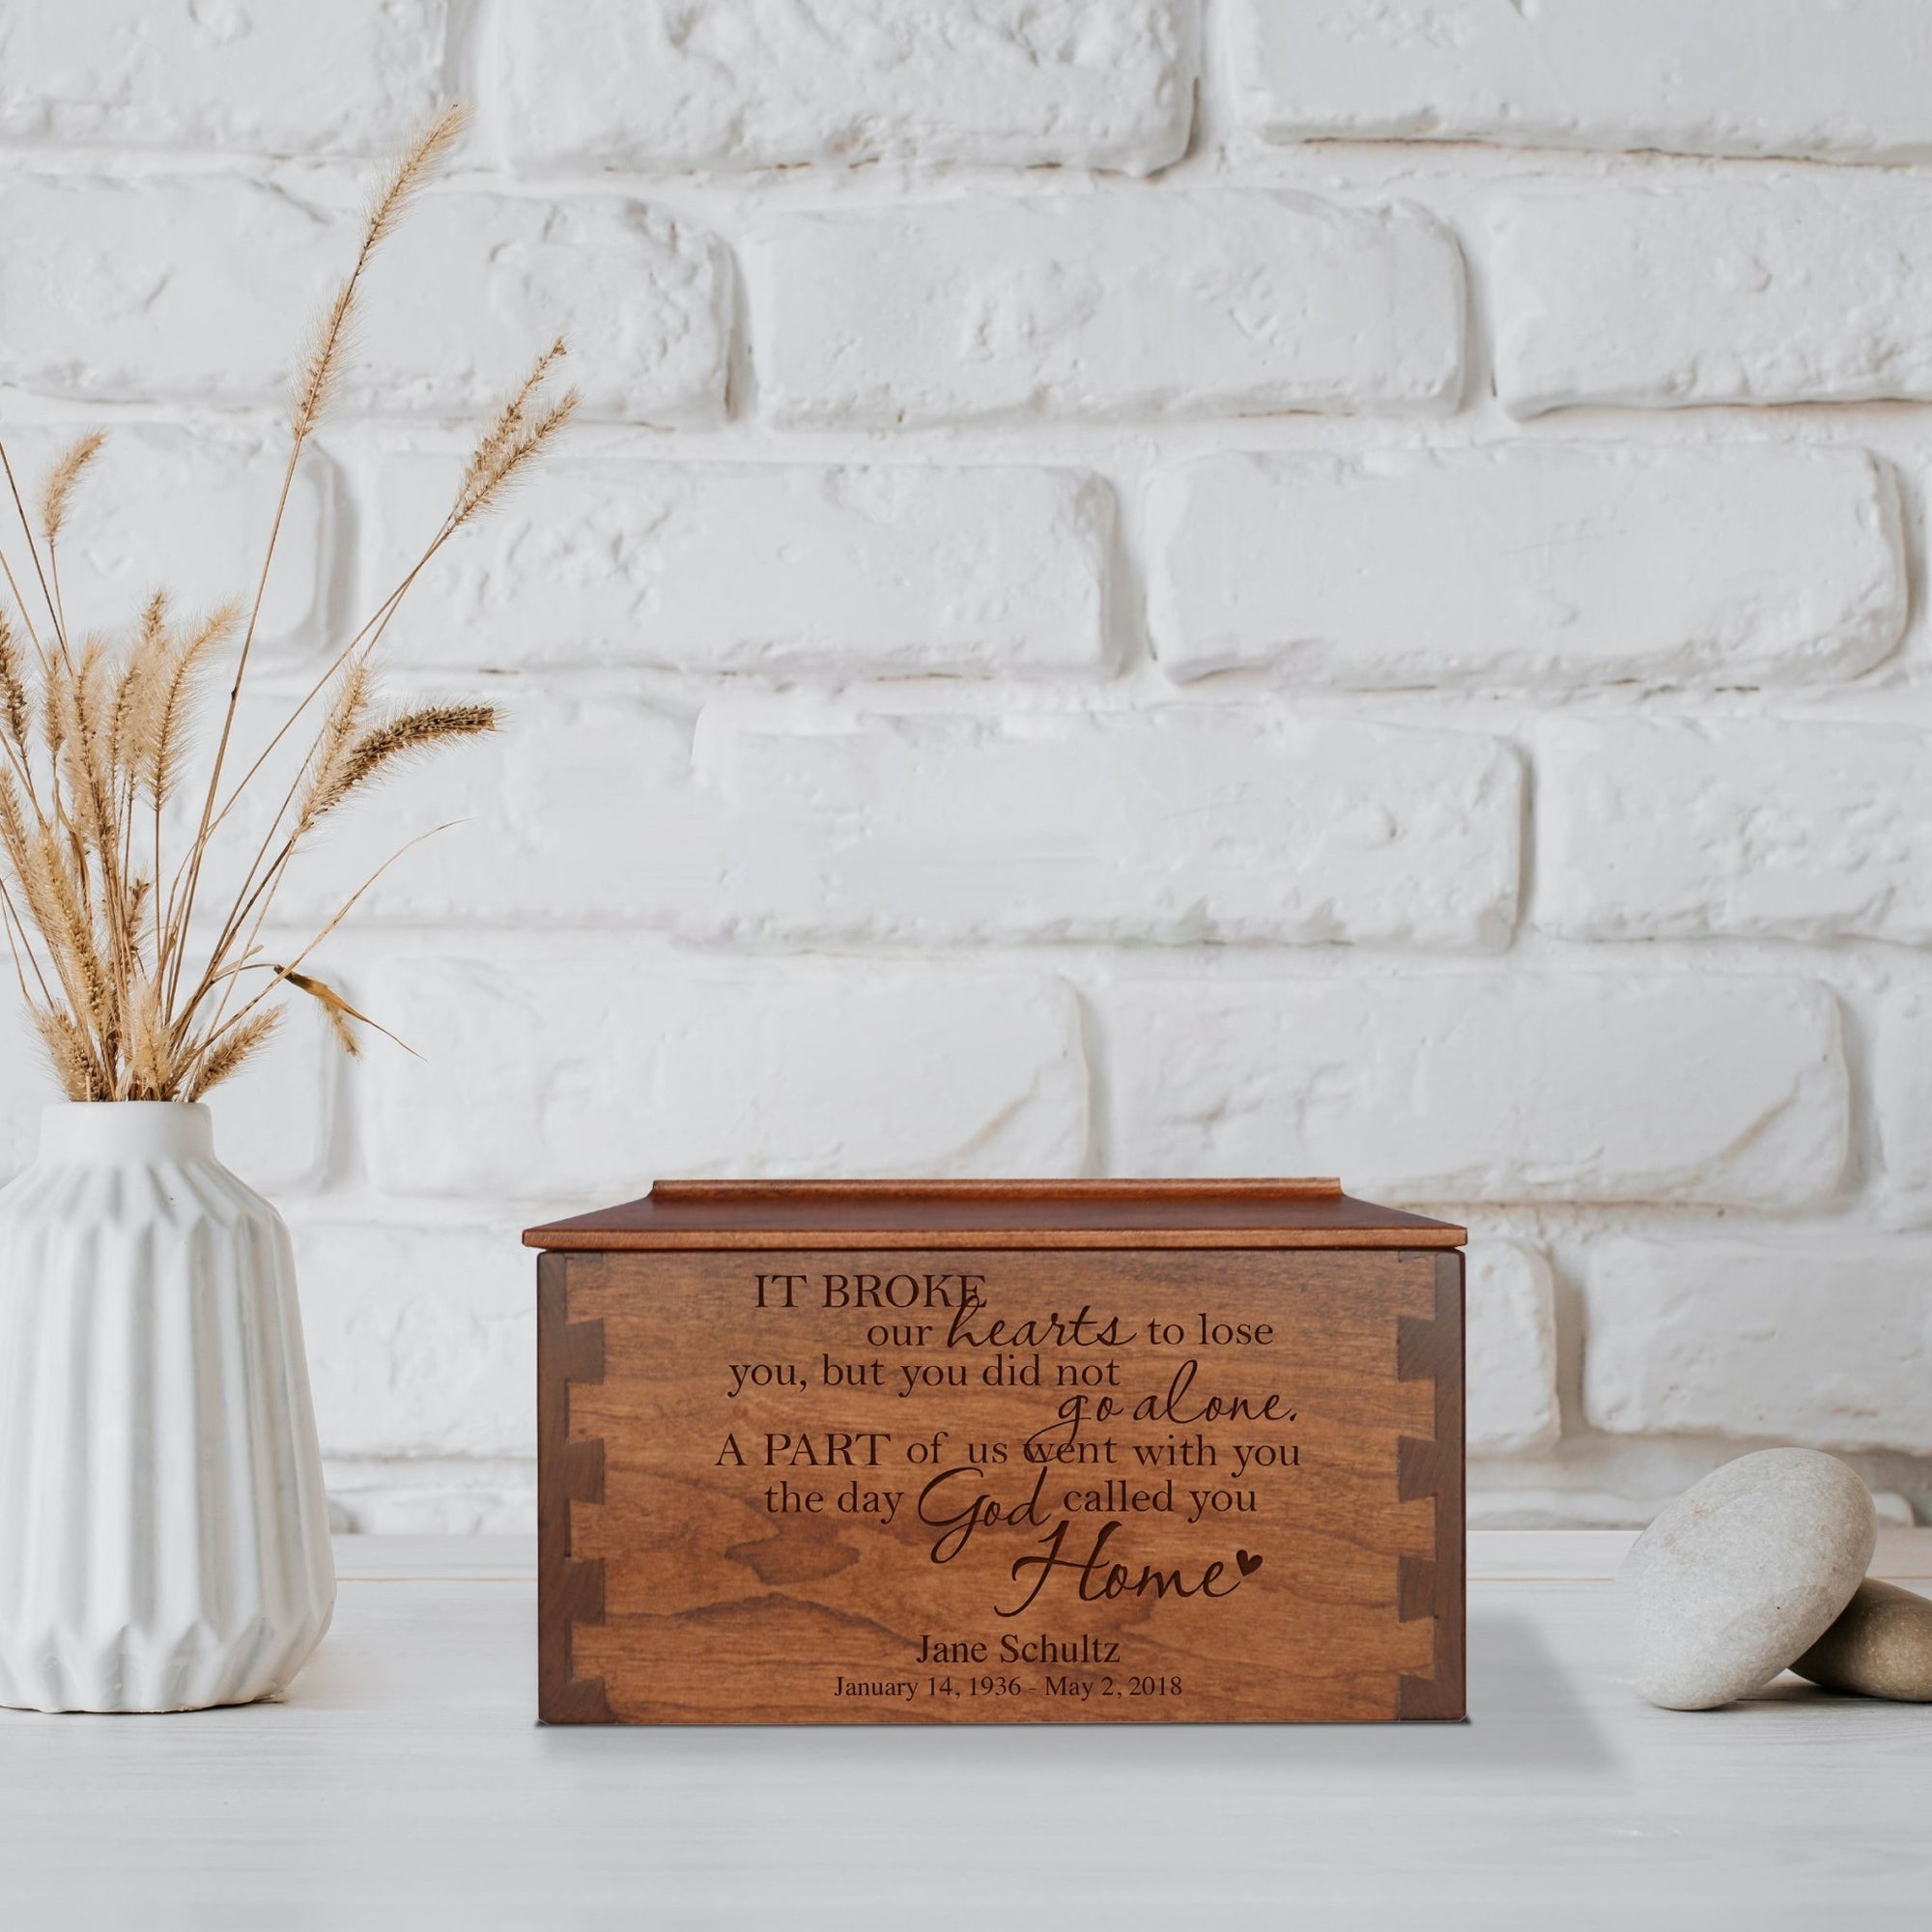 Custom Wooden Cremation Urn Box Medium for Human Ashes holds 146 cu in It Broke Our Hearts - LifeSong Milestones